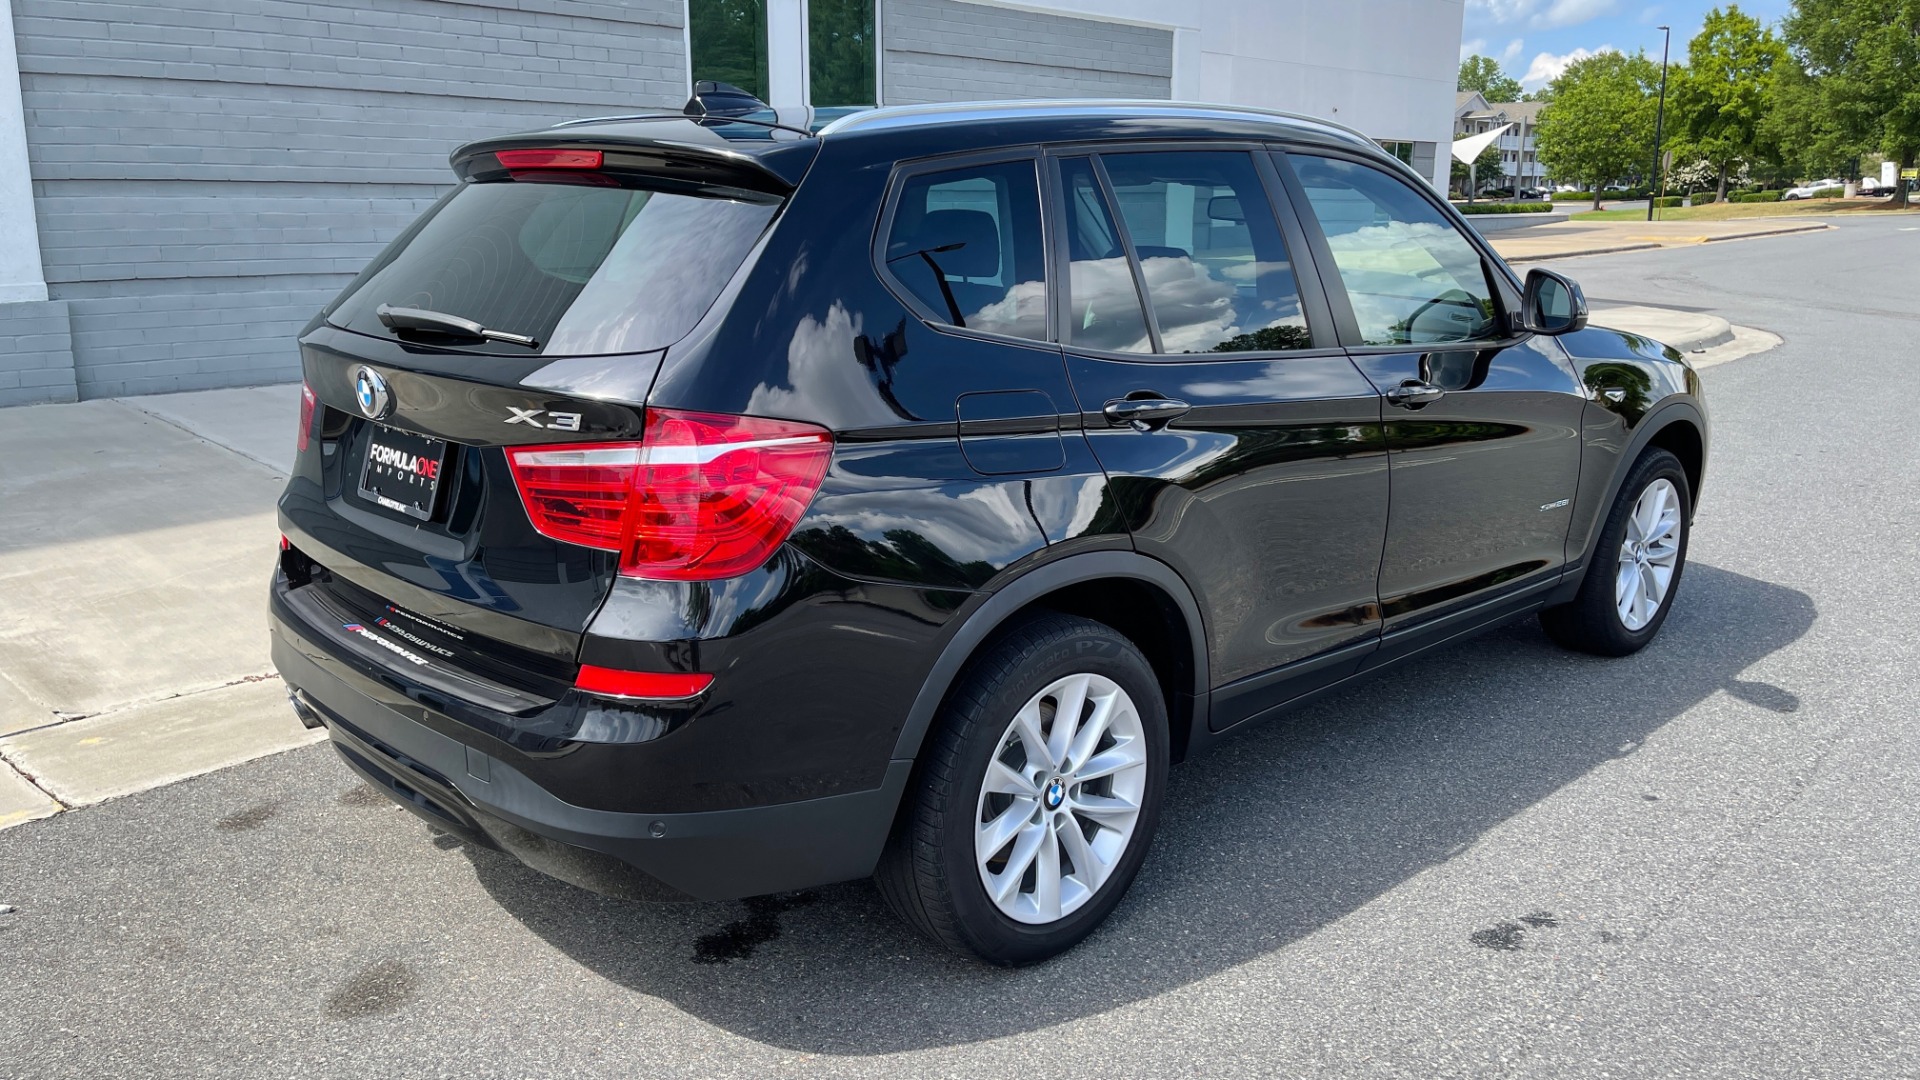 Used 2017 BMW X3 SDRIVE28I / DRVR ASST PKG / HTD STS / REARVIEW / 18IN WHEELS for sale Sold at Formula Imports in Charlotte NC 28227 2